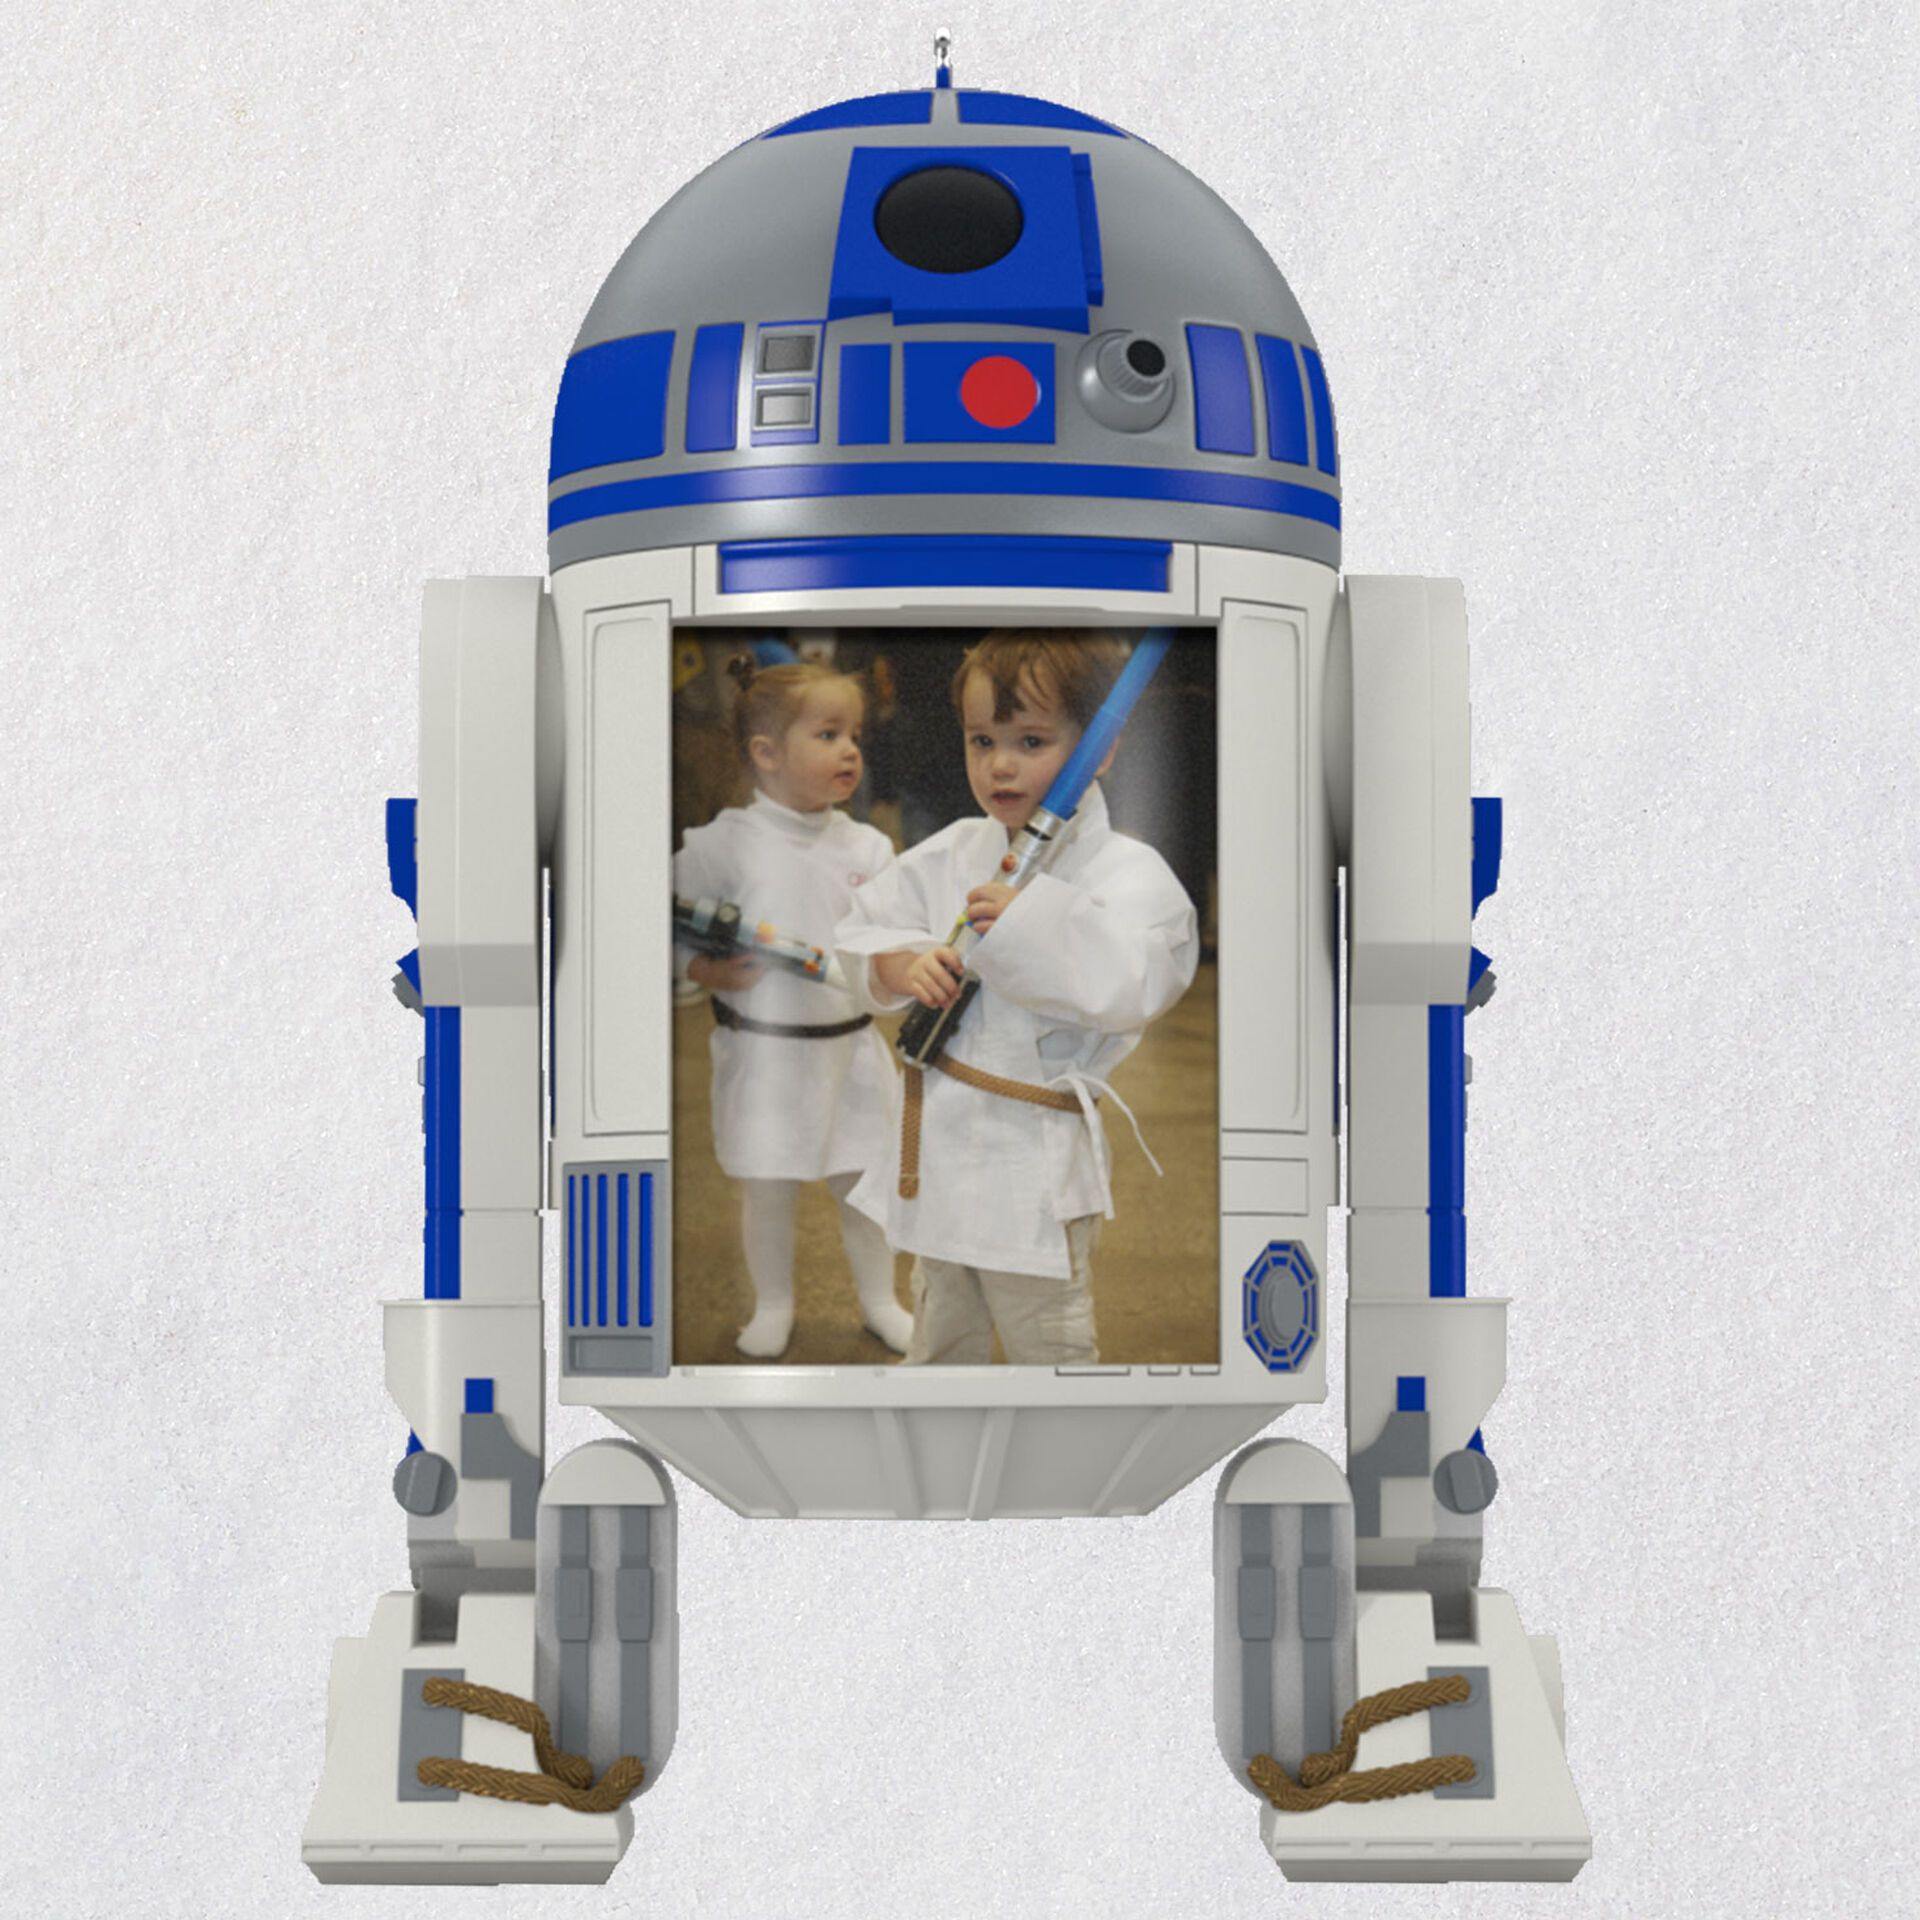 Hallmark 2020 Star Wars™ R2-D2 The Force Is With Us Photo Frame Ornament